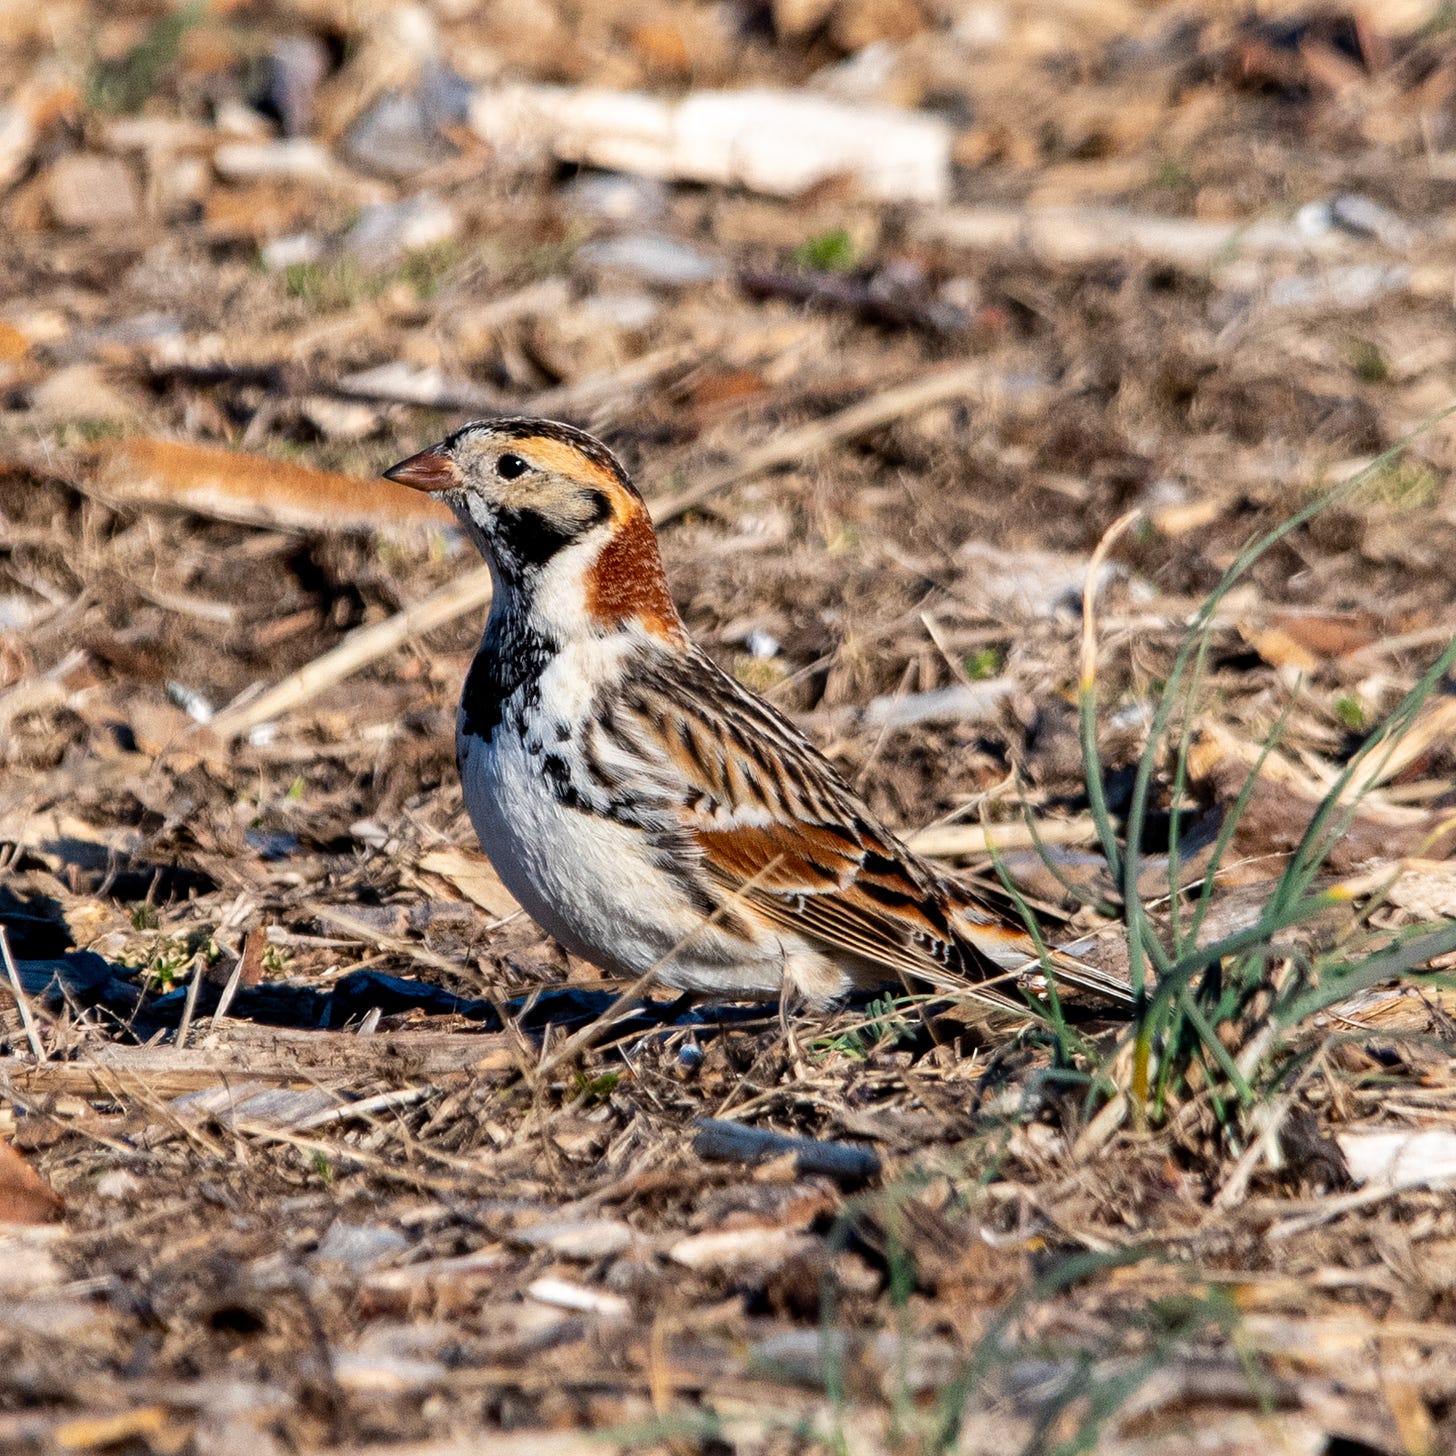 A Lapland longspur (yellow supercilium, gray lore and auricular, rufous nape) stretches its head up to survey its surroundings